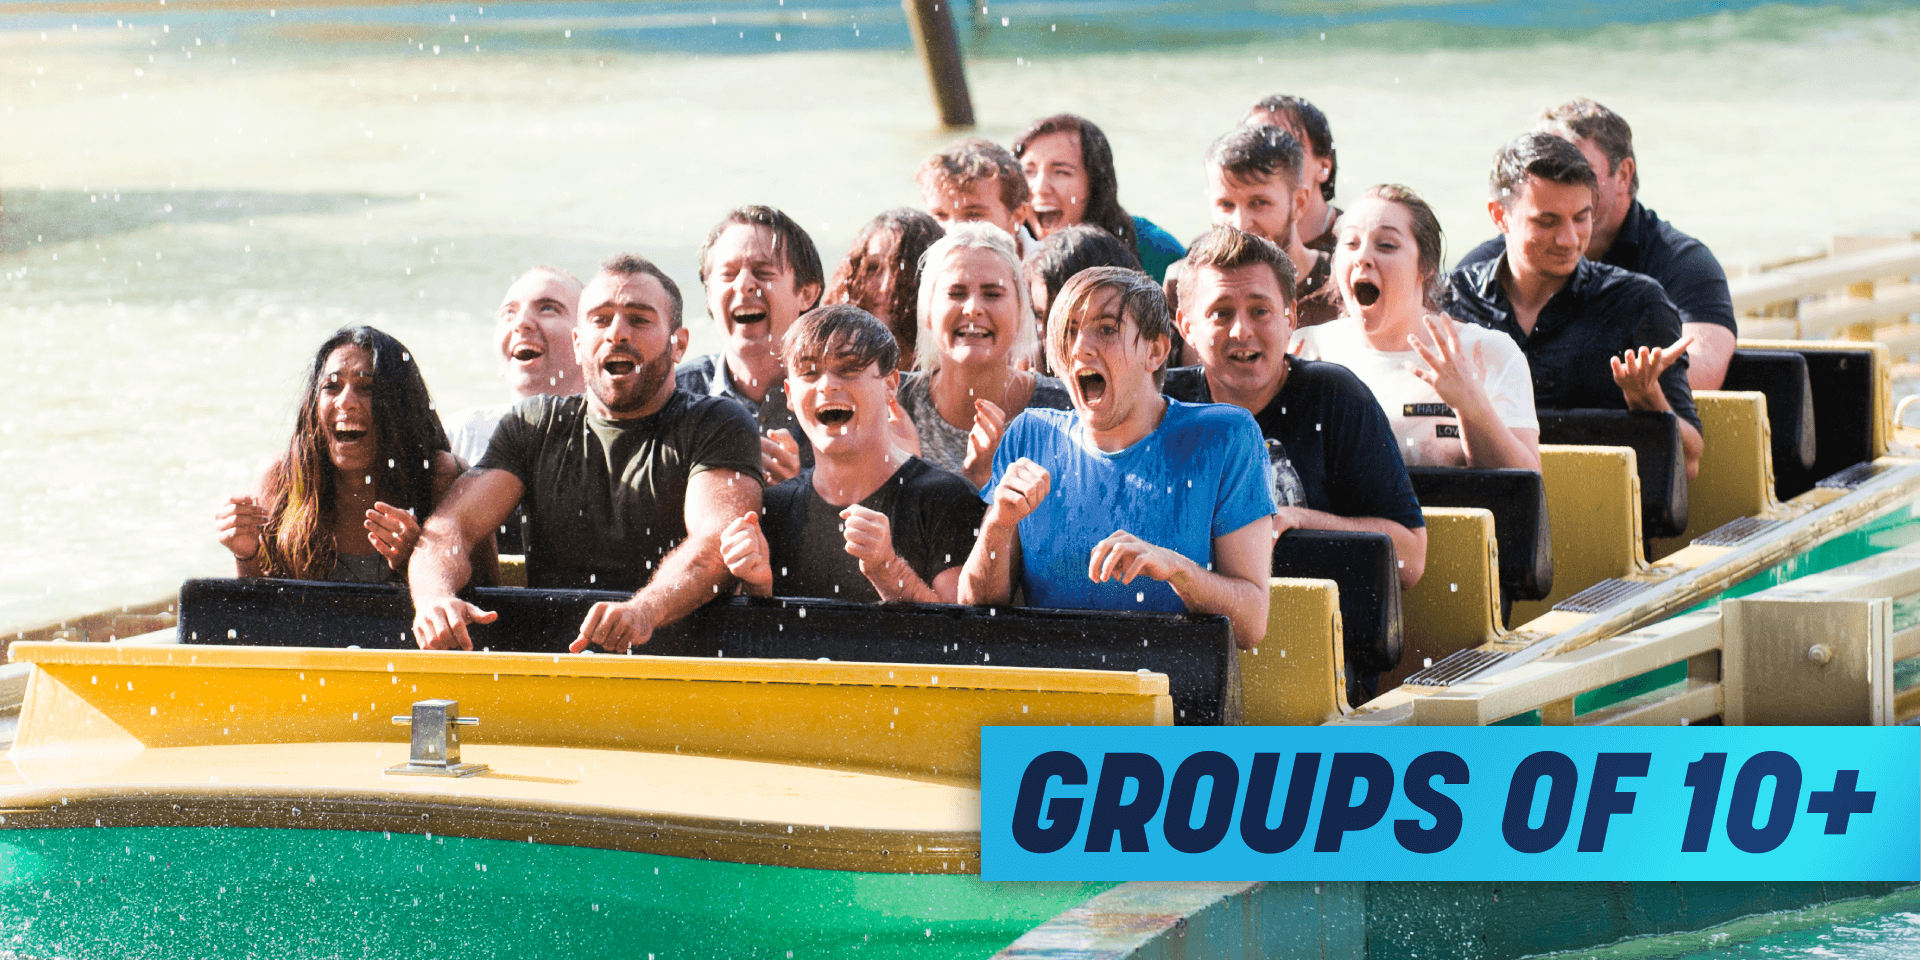 Groups of 10+ Theme Park Group Deal